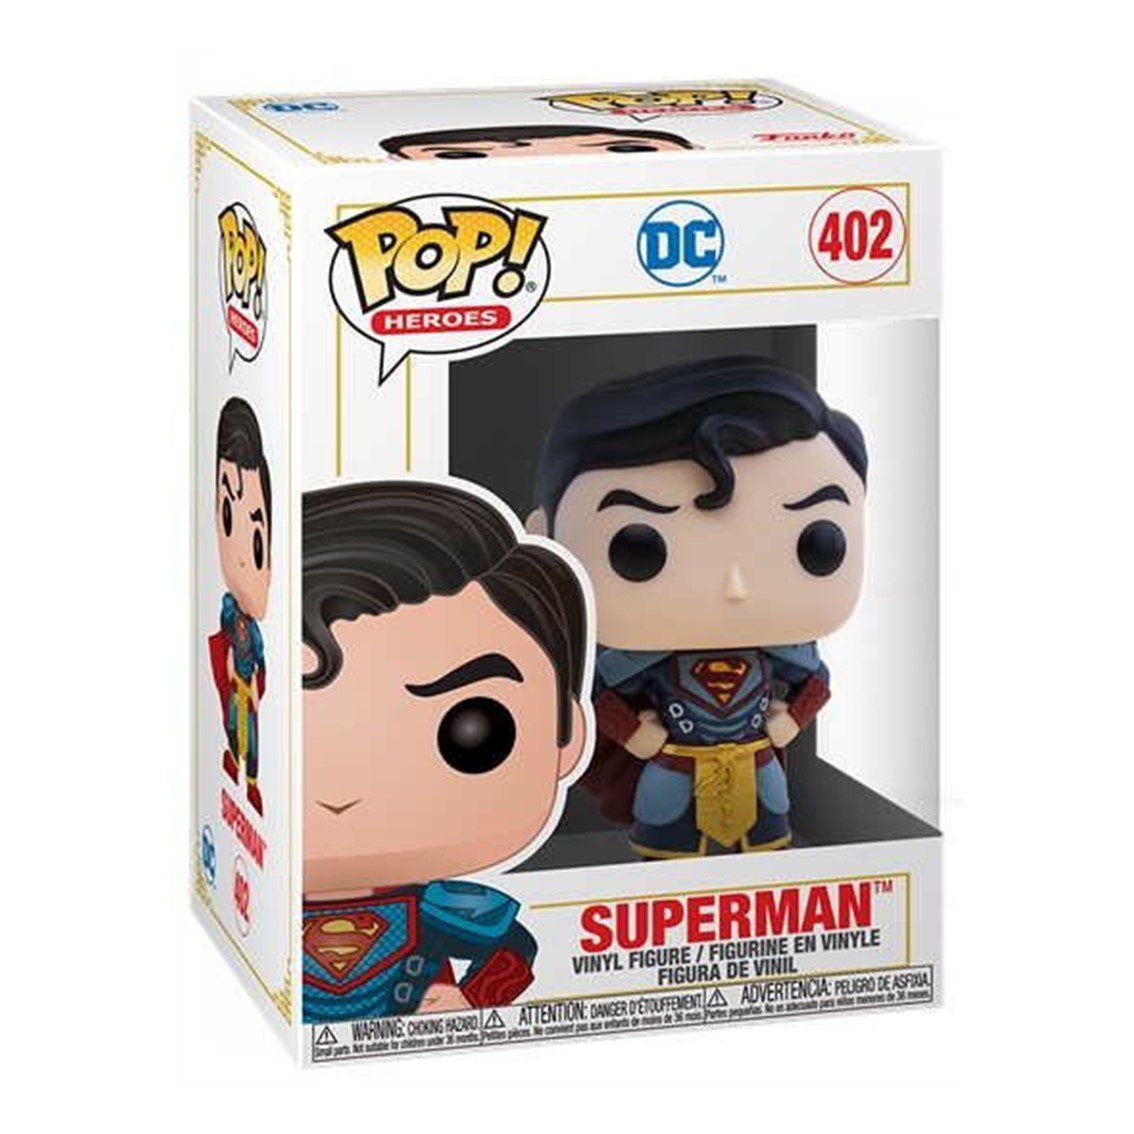 889698524339-PN-52433-Cod.-Articulo-MGS0000005771-Funko-pop-dc-imperial-palace-superman-52433-2